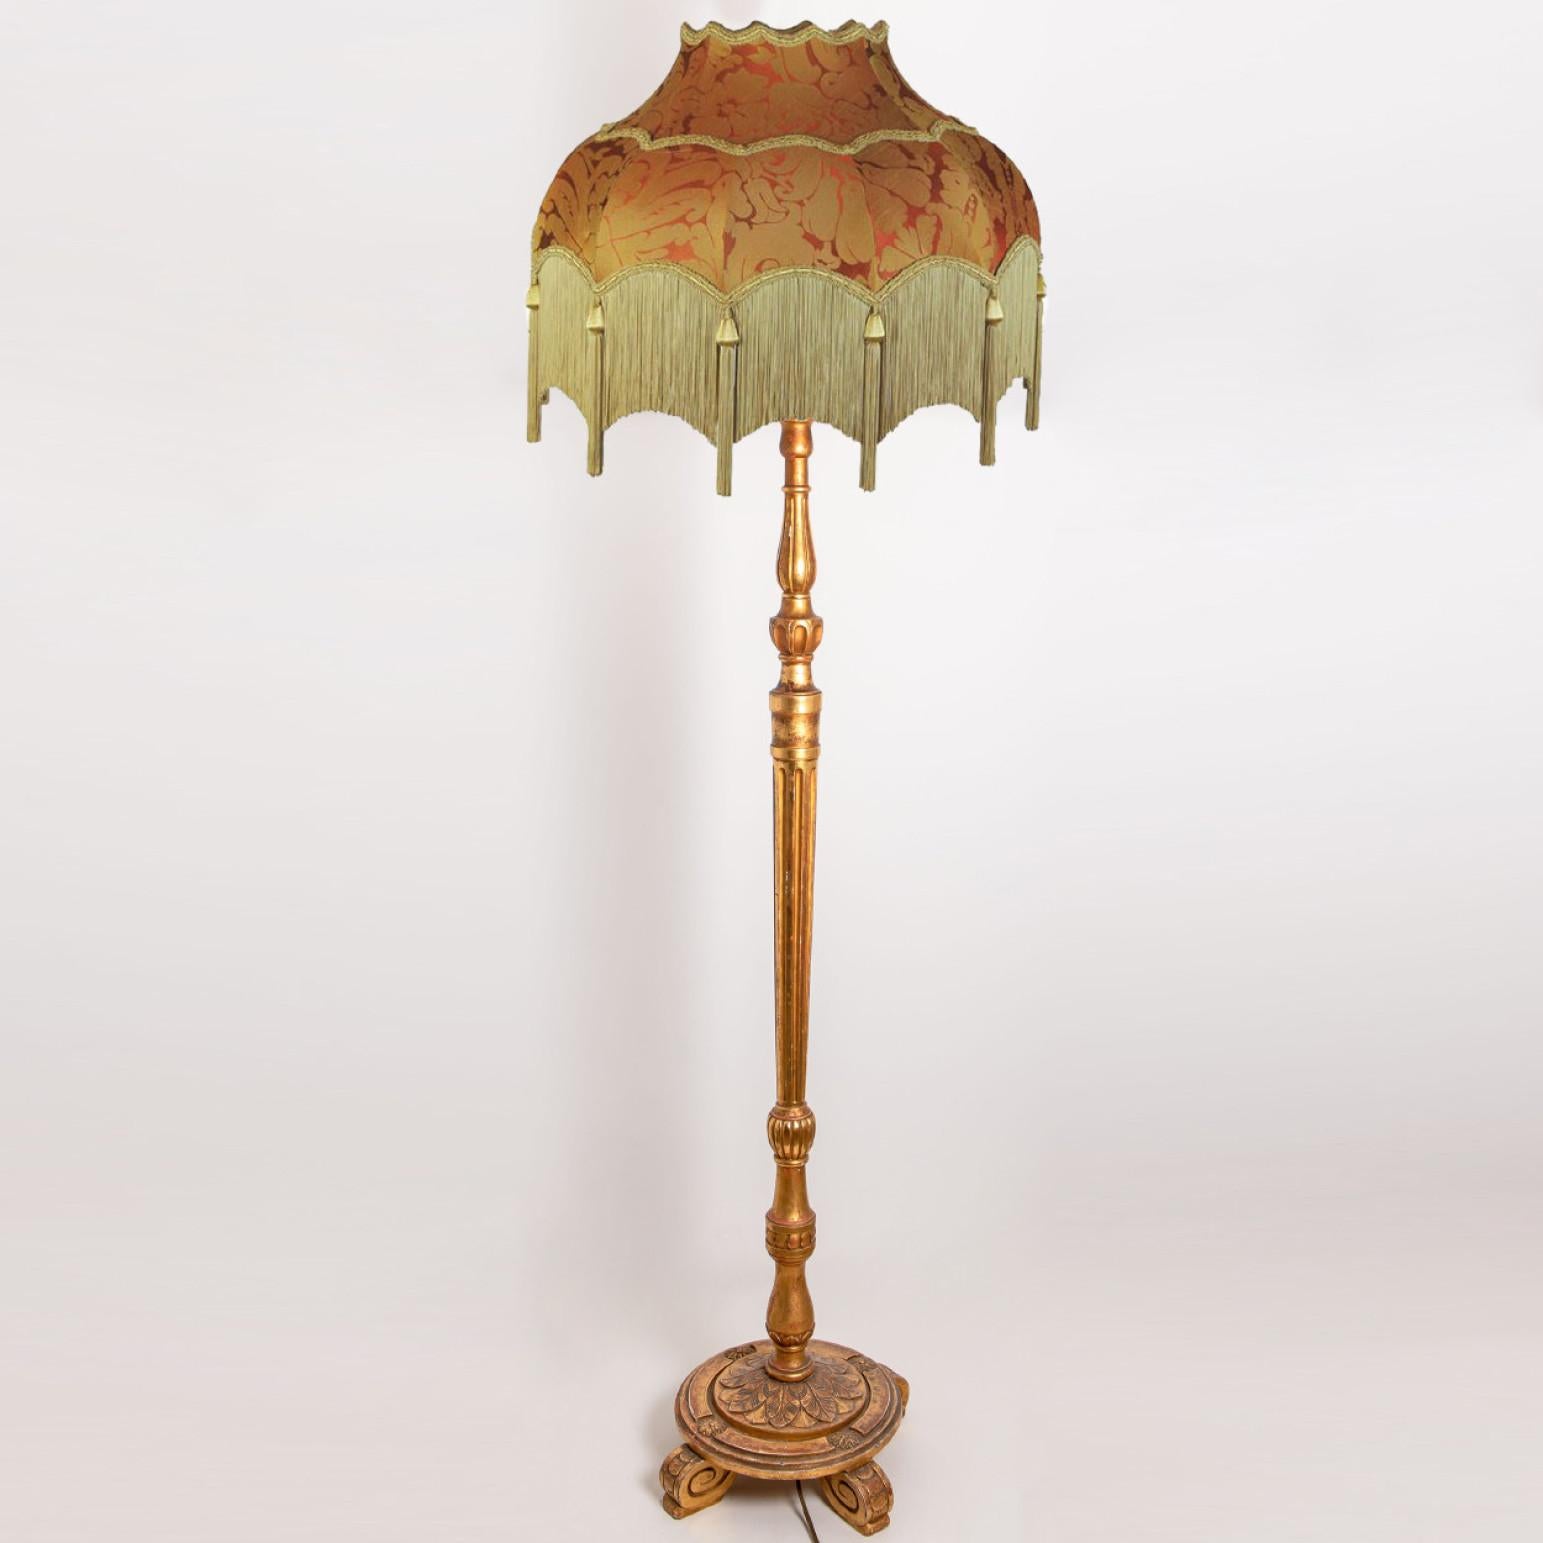 Hand-Crafted Wood Carved Floor Lamp with Fringed Lampshade, Italy, 1970s For Sale